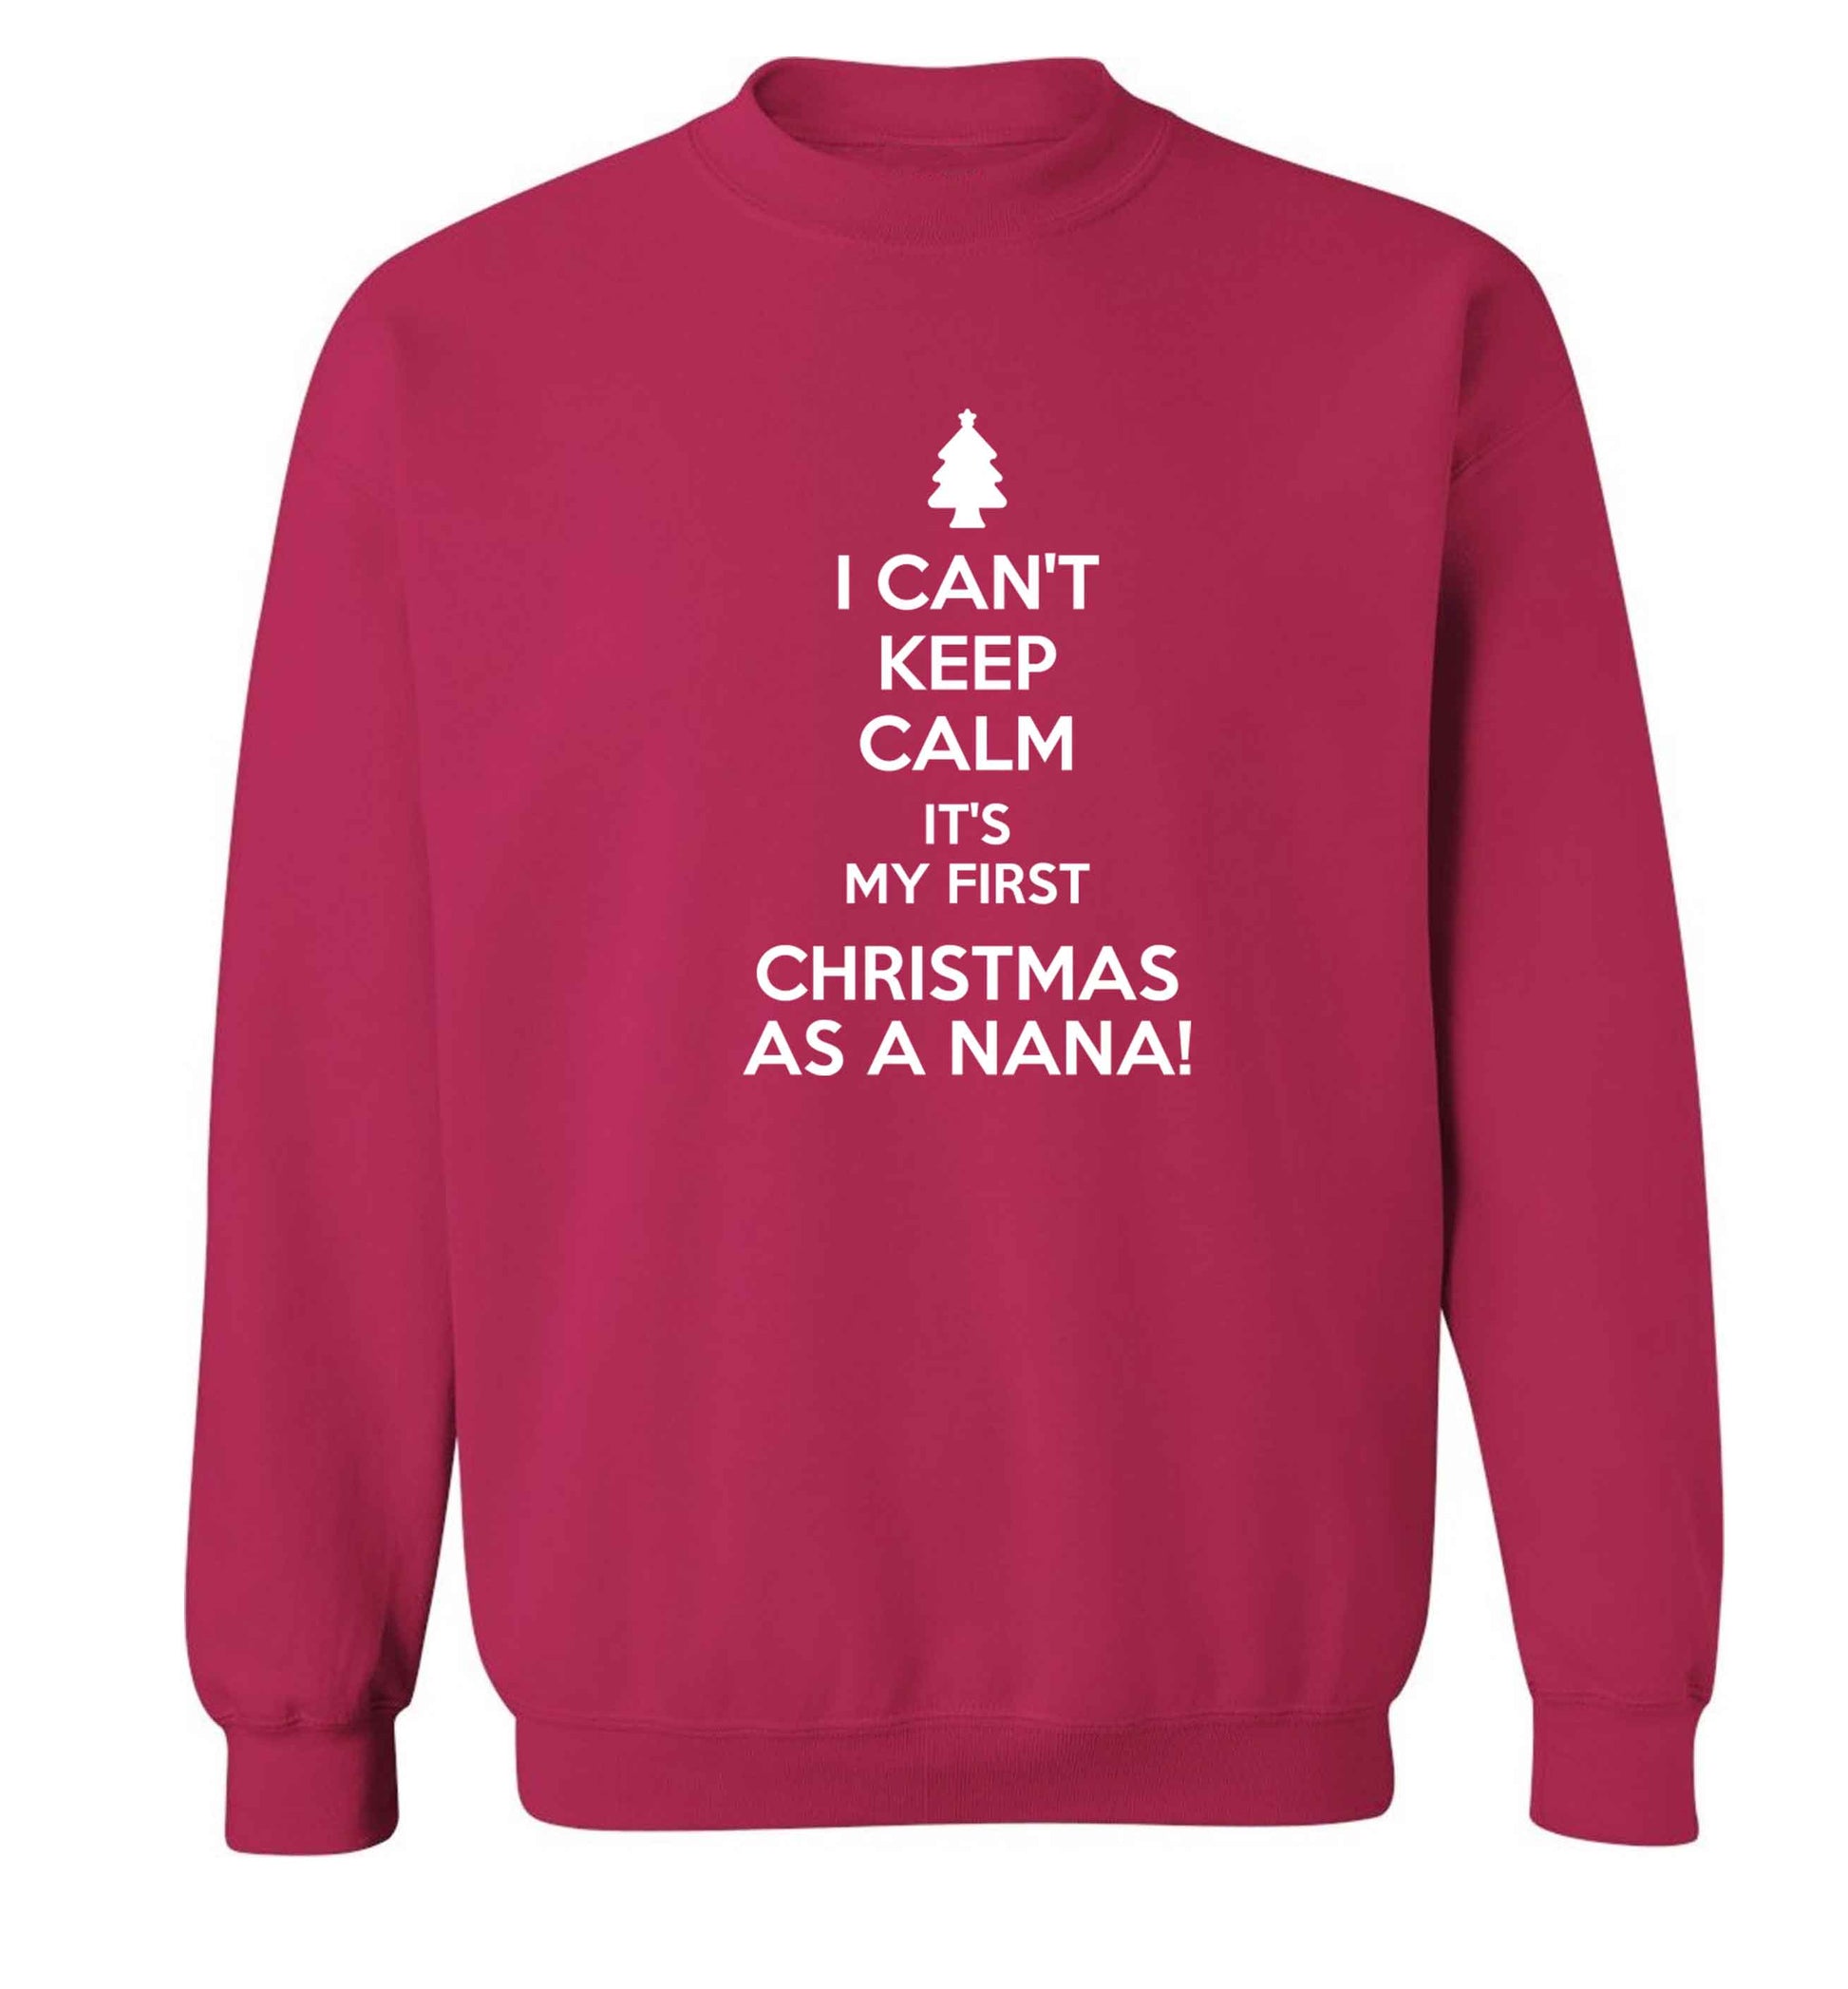 I can't keep calm it's my first Christmas as a nana! Adult's unisex pink Sweater 2XL